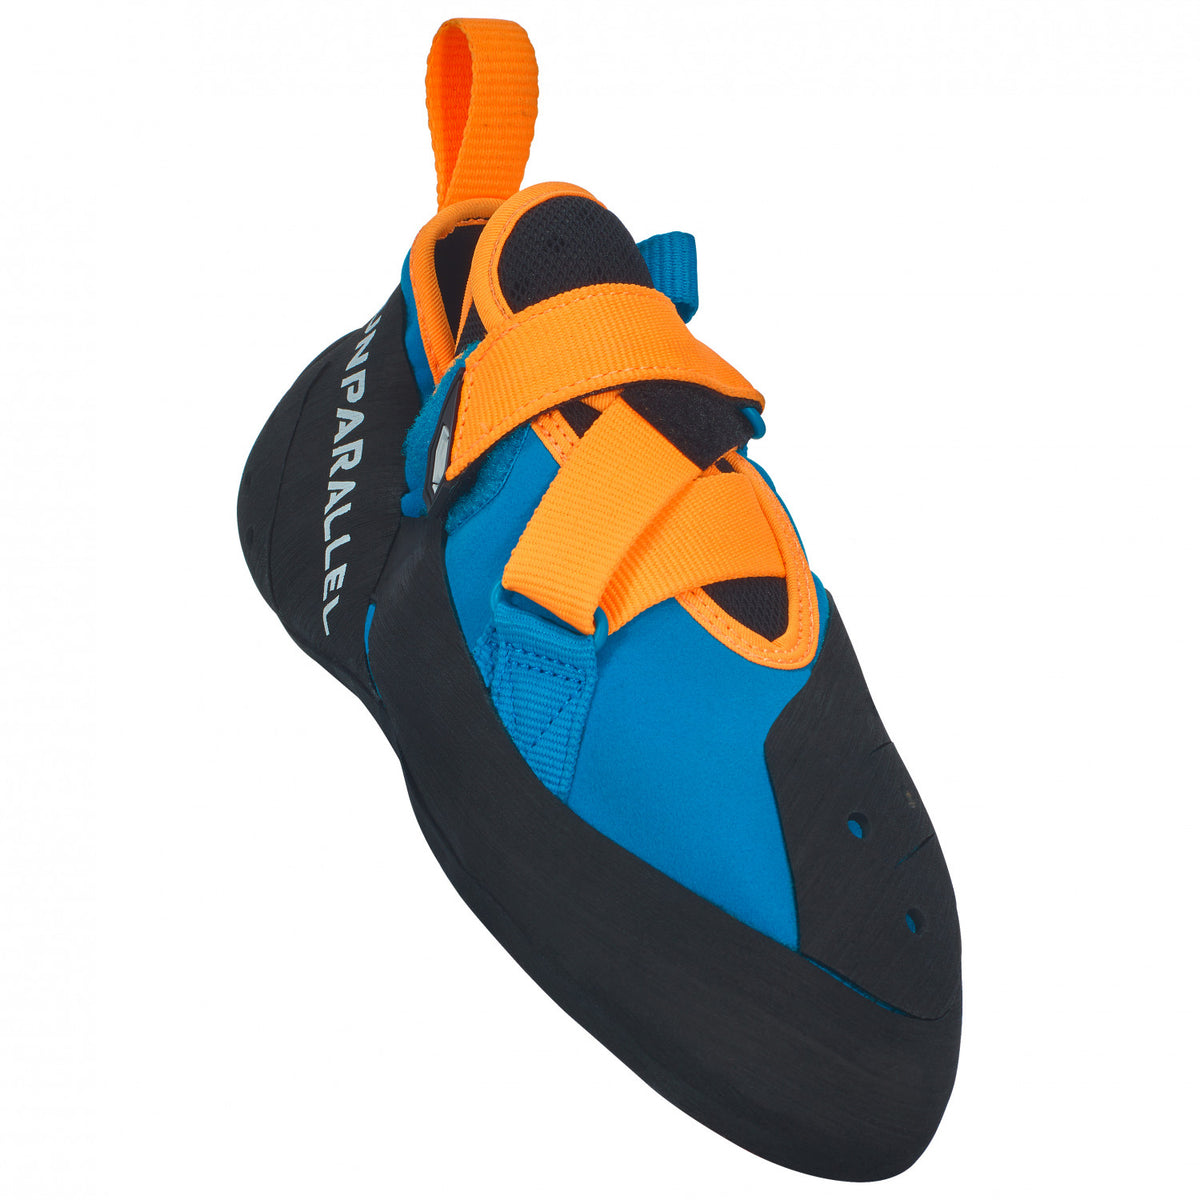 Unparallel Lyra climbing shoes in deep blue orange punch colour